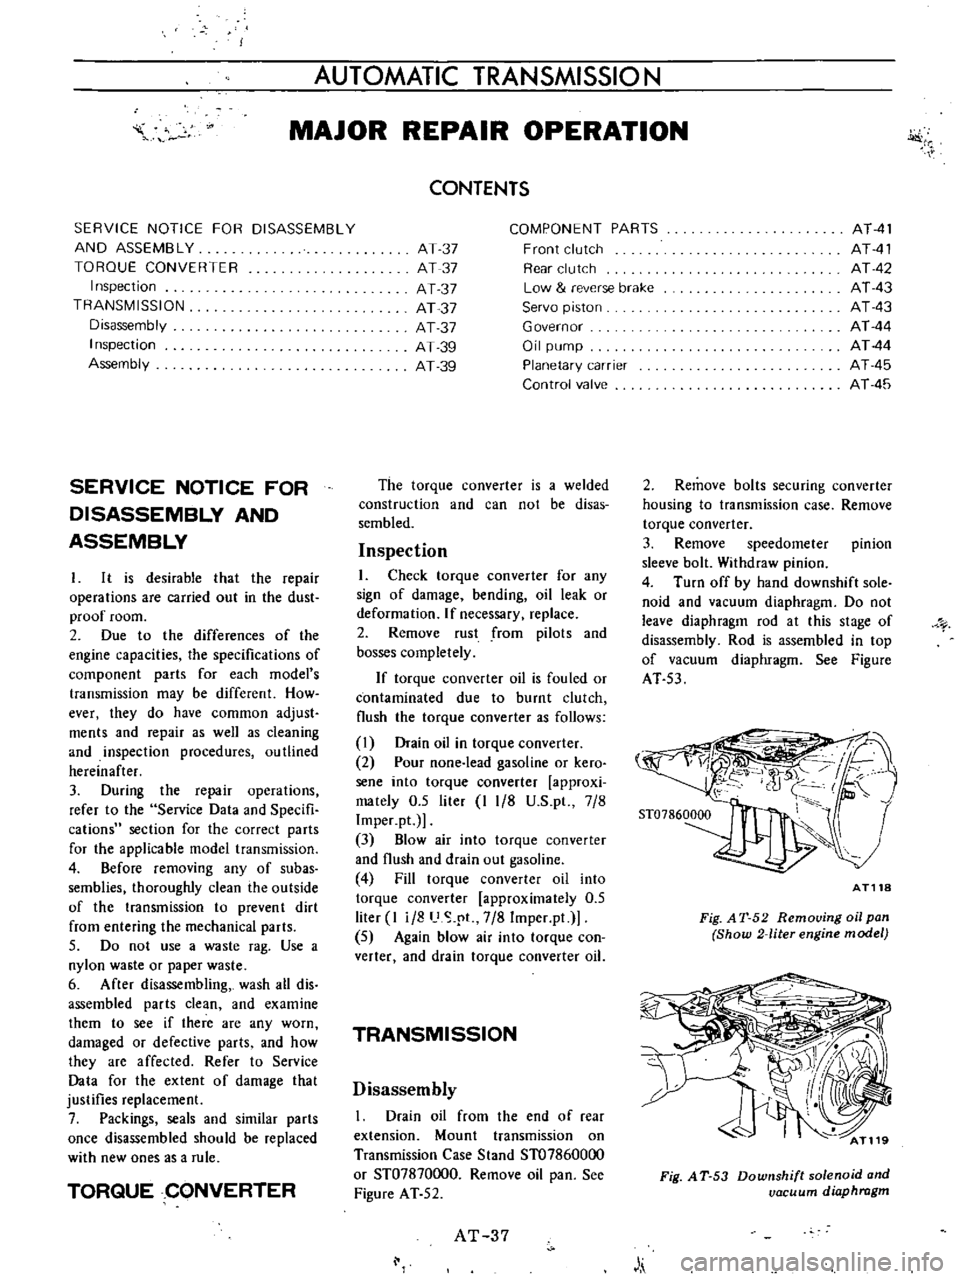 DATSUN B110 1973  Service Repair Manual 
AUTOMATIC

TRANSMISSIO 
N

i

MAJOR 
REPAIR 
OPERATION

SERVICE 
NOTICE 
FOR 
DISASSEMBLY

AND 
ASSEMBLY

TORQUE 
CONVERTER

Inspection

TRANSMISSION

Disassembly

Inspection

Assembly

SERVICE 
NOTI